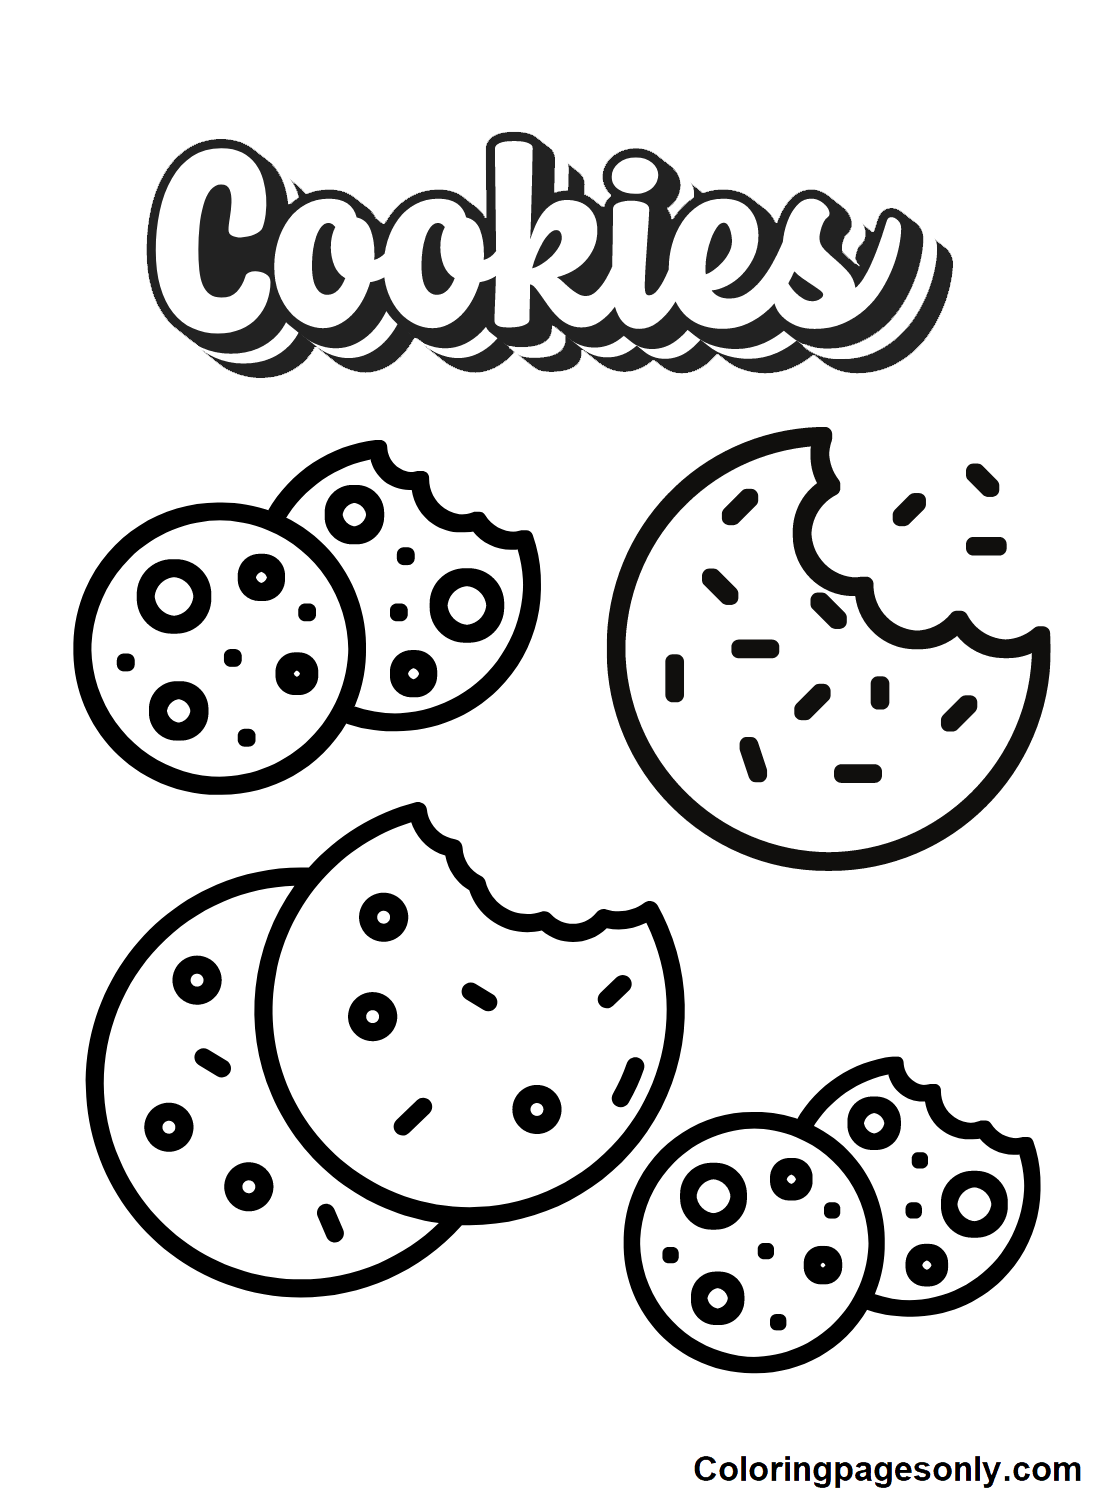 Cookie color Sheet Coloring Pages